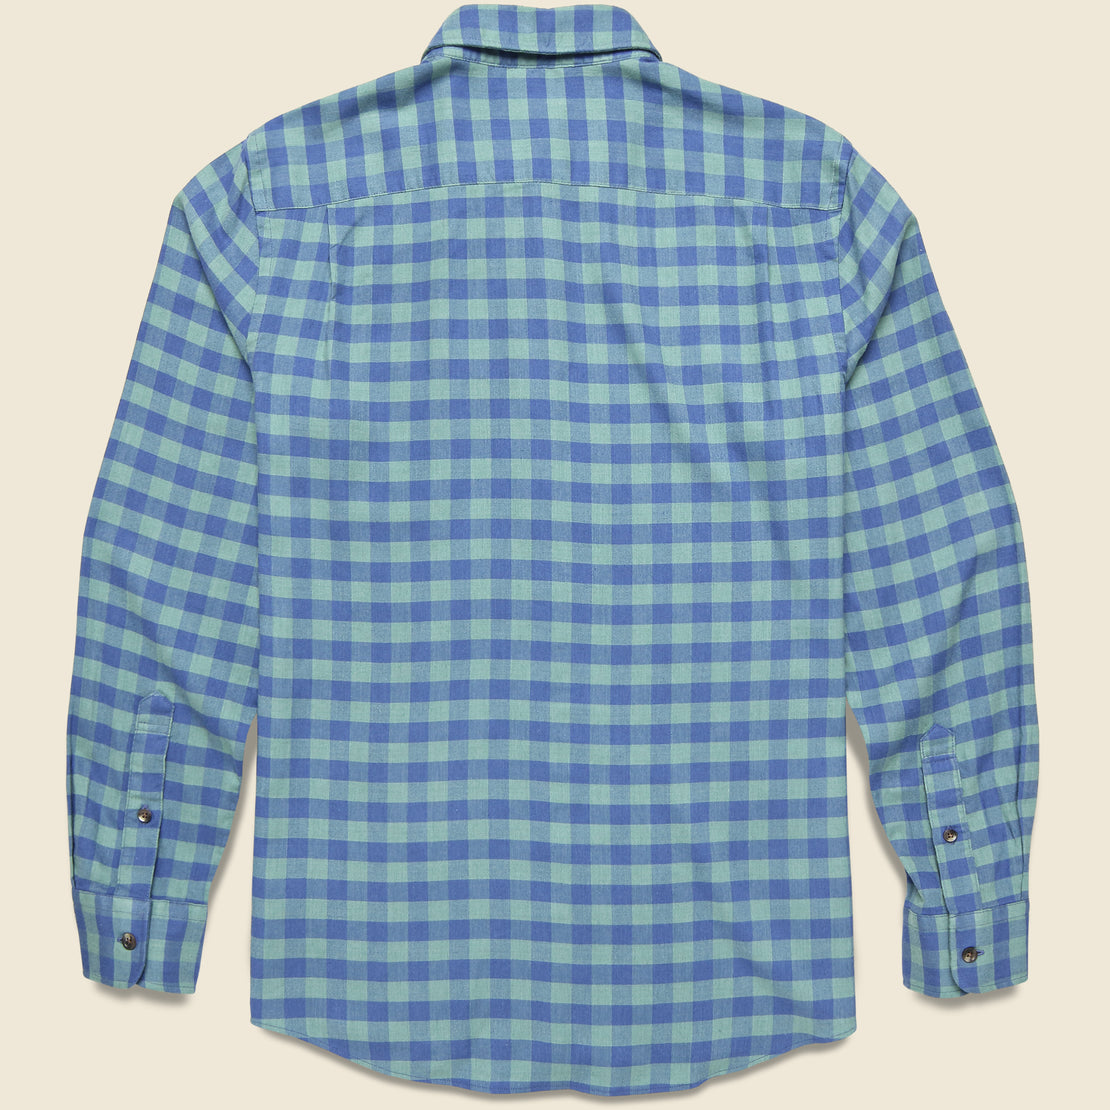 All Time Shirt - Moss Cove Gingham